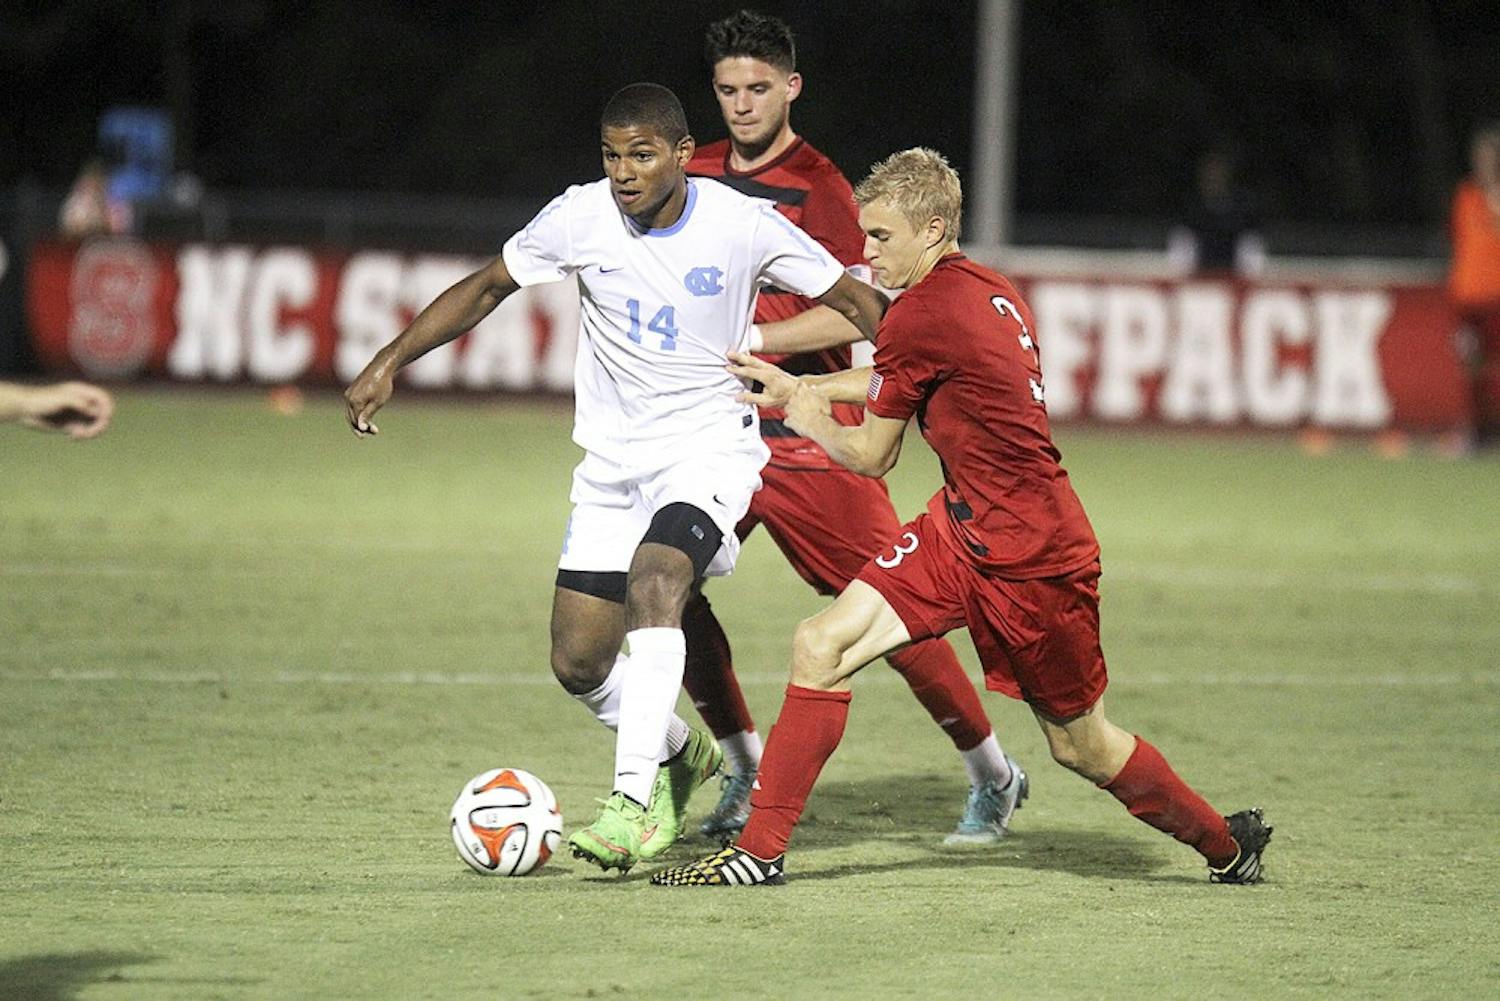 The UNC men's soccer team defeated NC State 1-0 in Raleigh on Friday. 